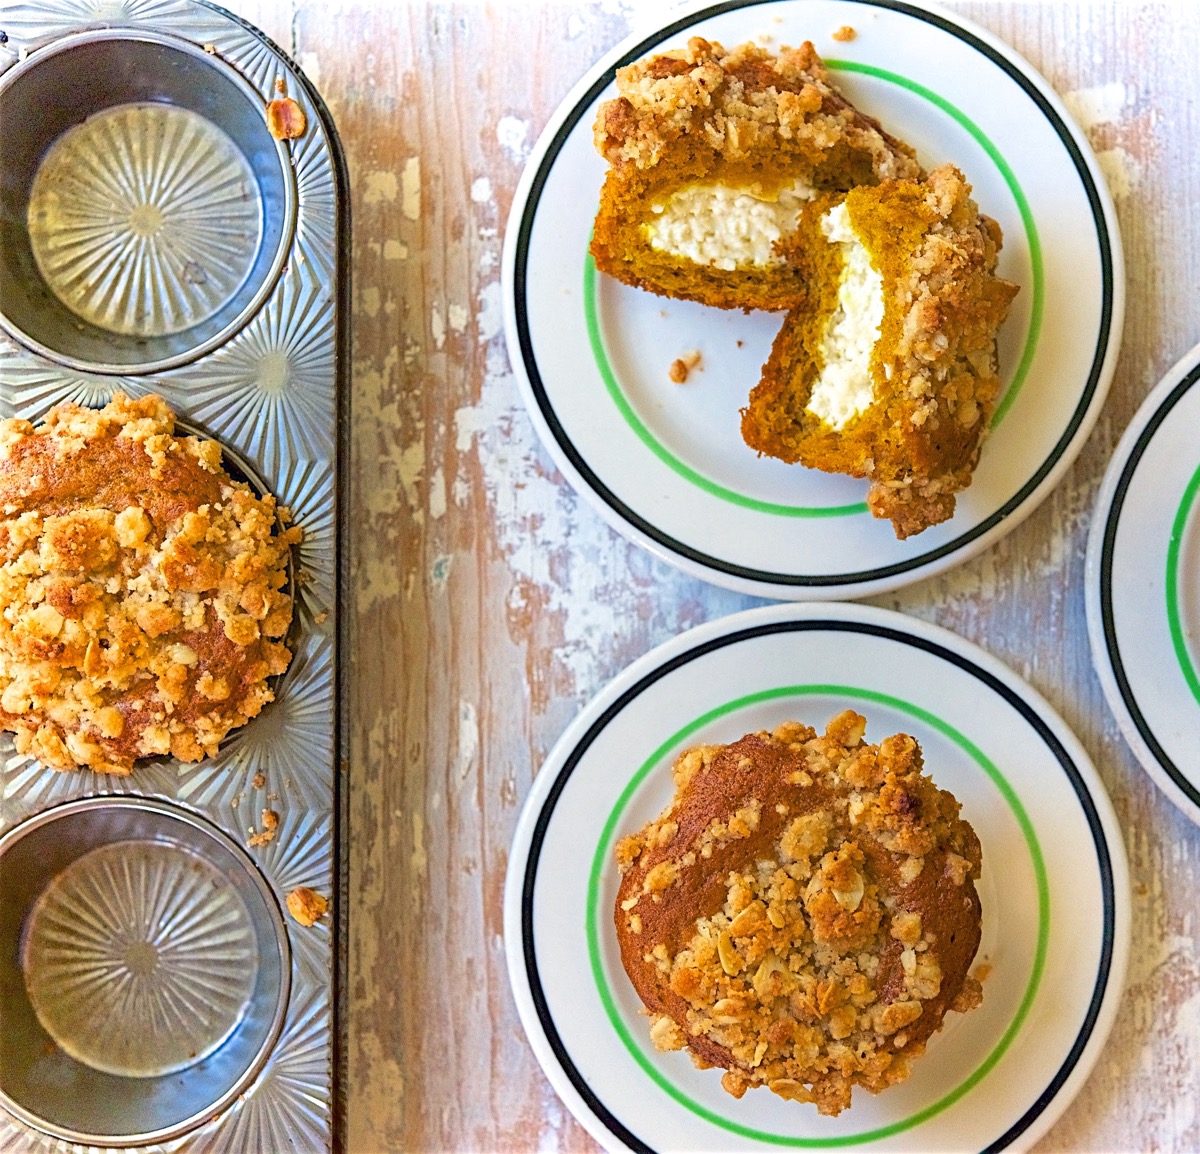 Cream cheese-filled pumpkin muffins on two plates, one cut open